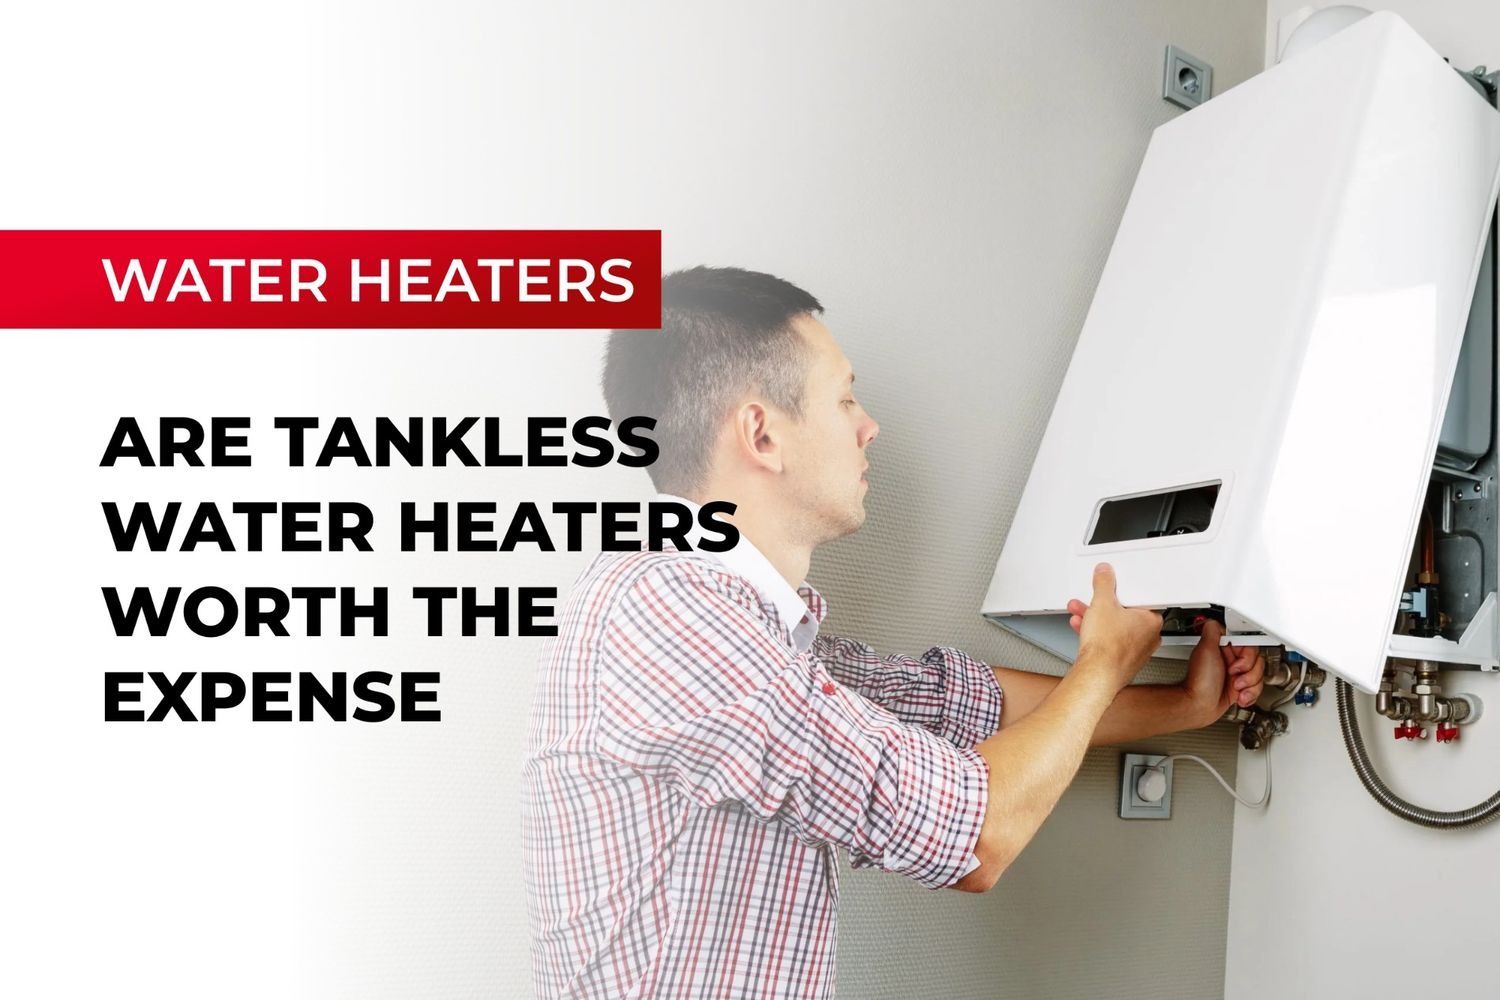 Are Tankless Water Heaters Worth The Expense?